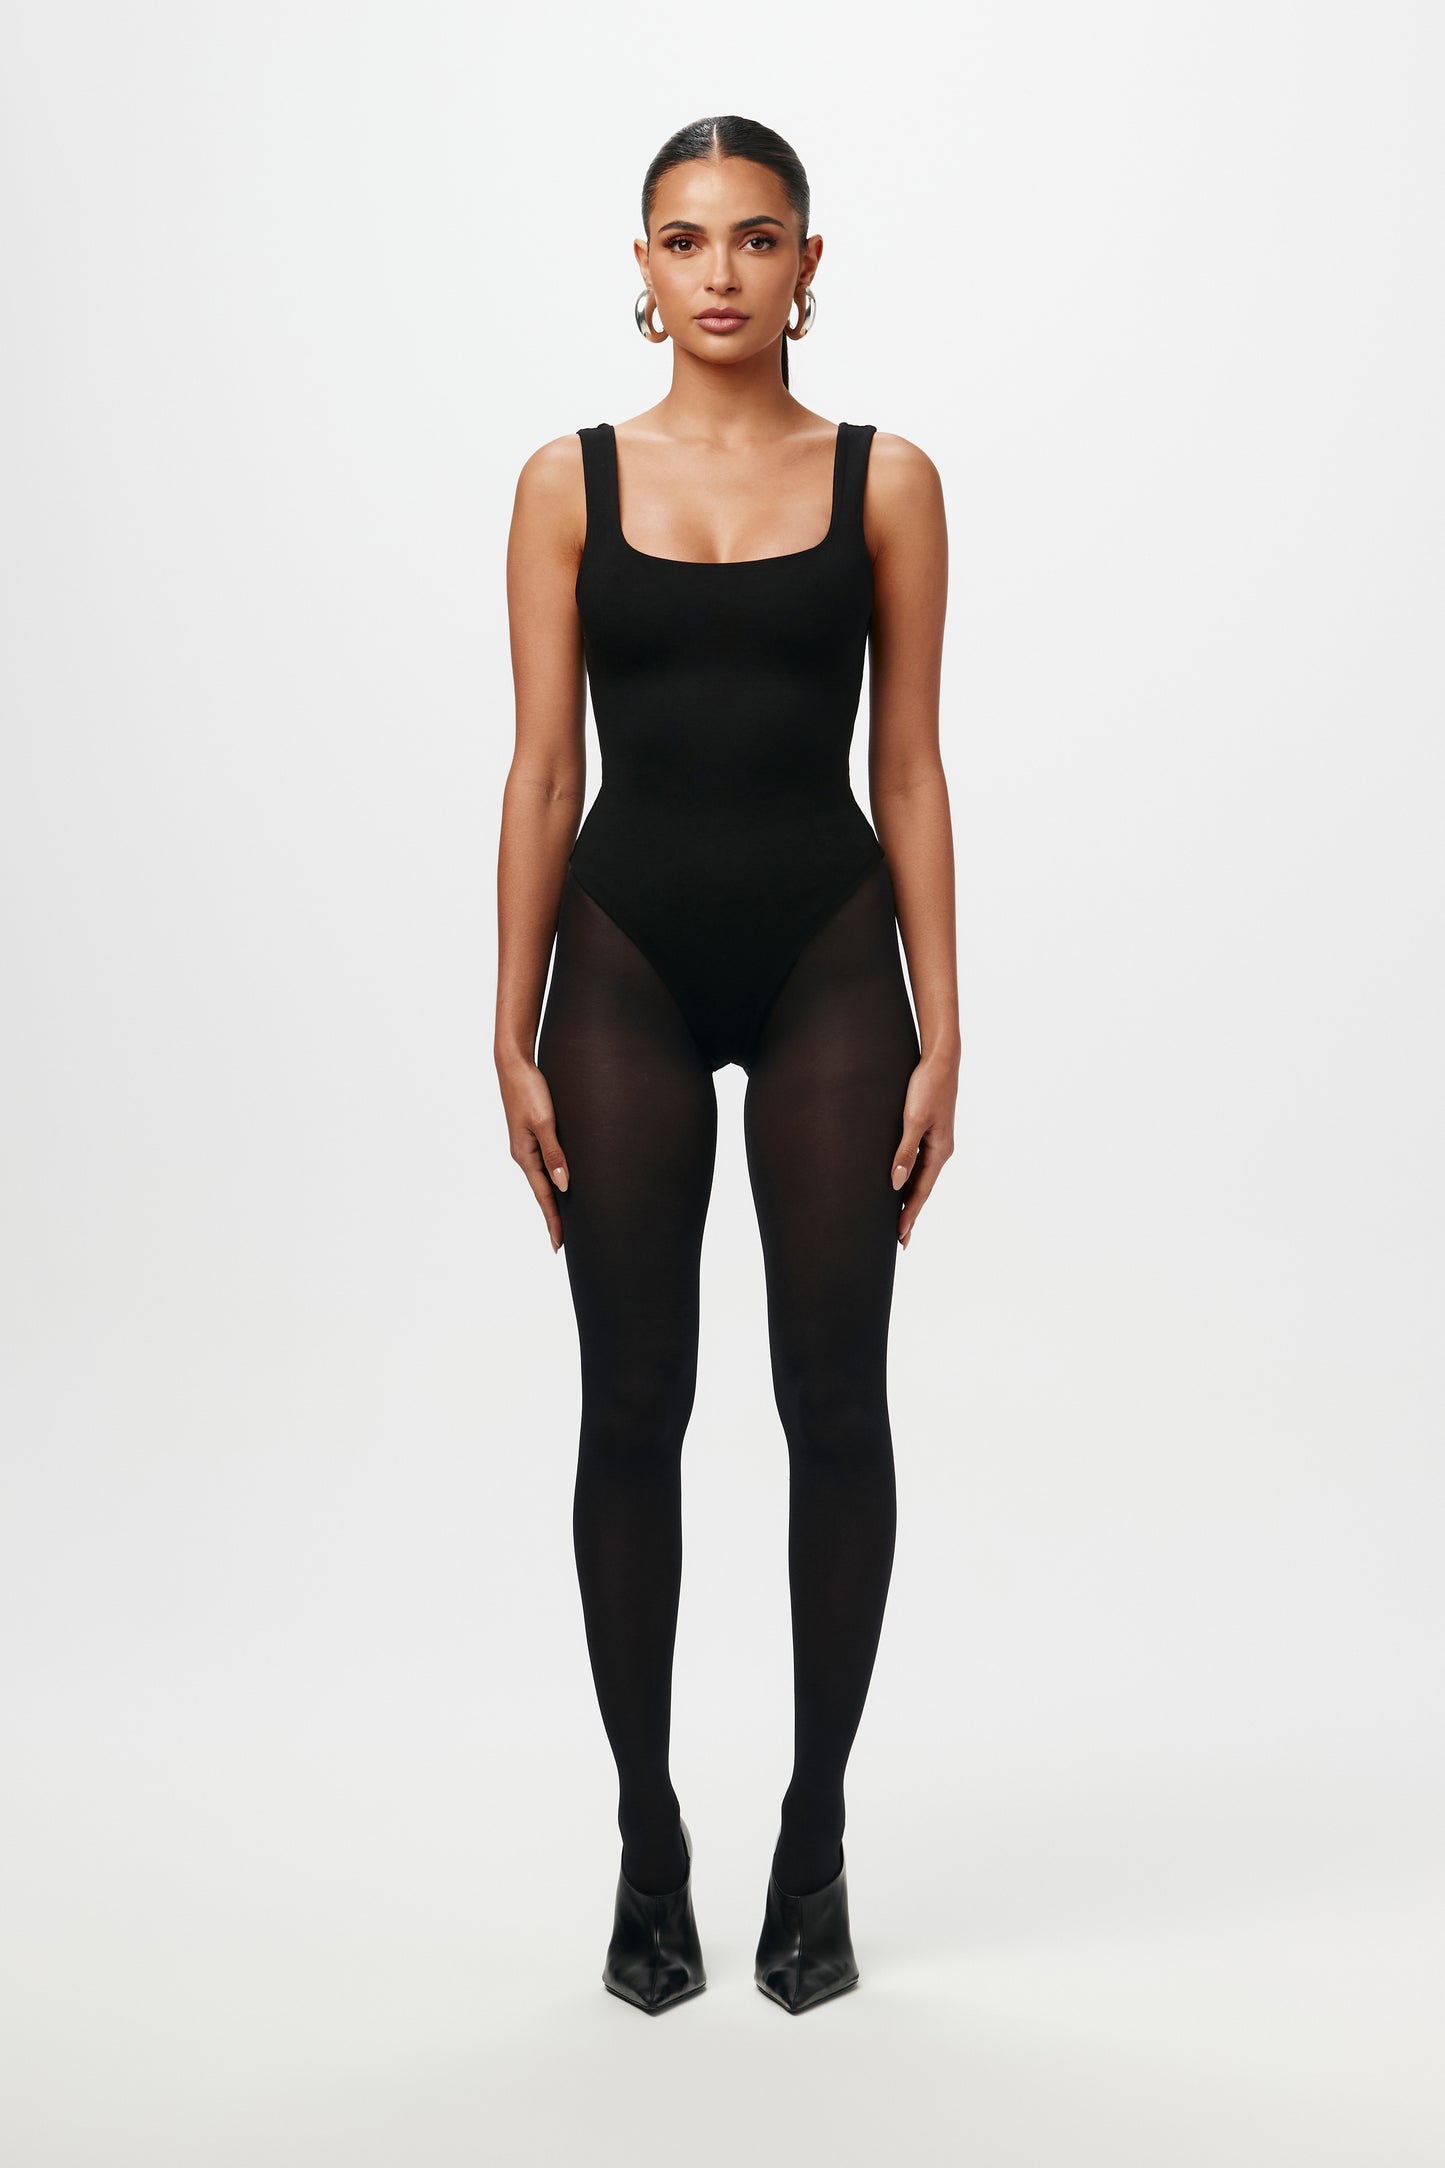 The Smooth Hourglass Bodysuit